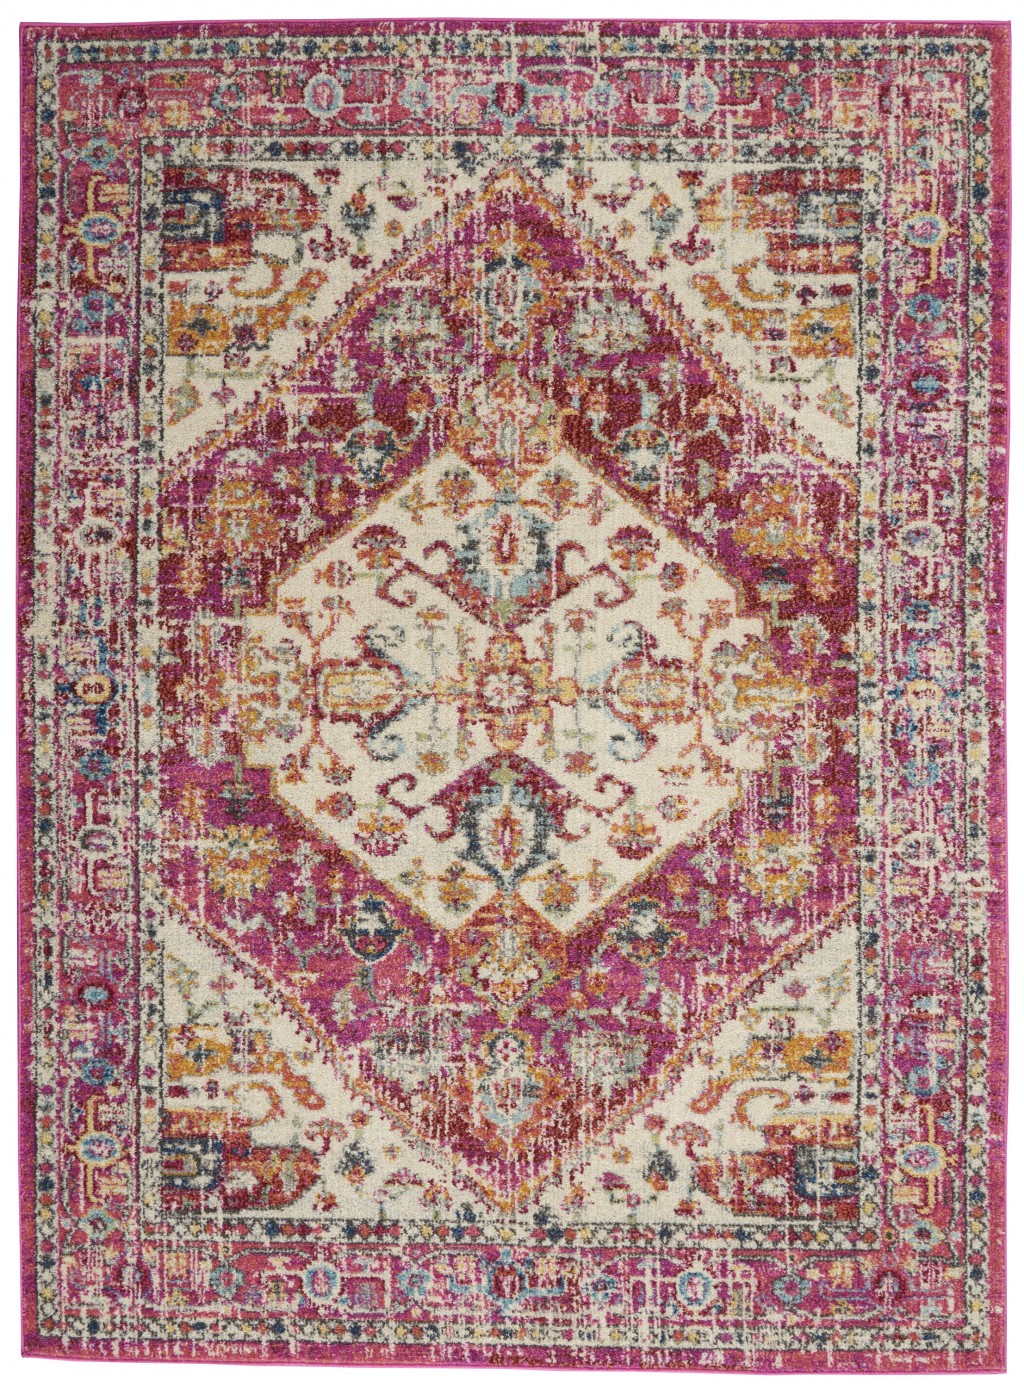 5' X 7' Pink And Ivory Power Loom Area Rug-385556-1